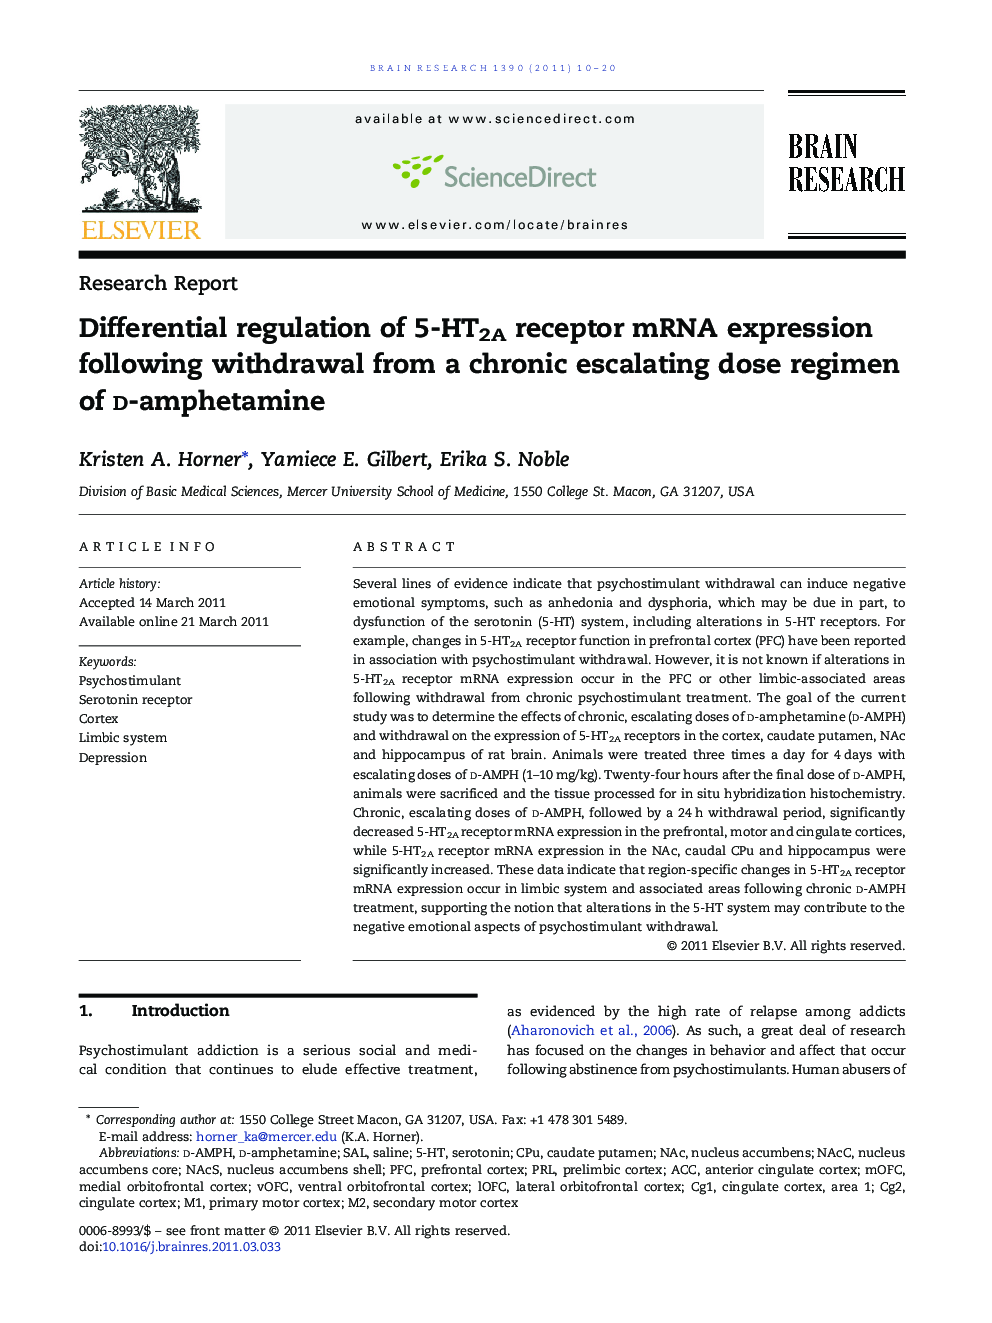 Differential regulation of 5-HT2A receptor mRNA expression following withdrawal from a chronic escalating dose regimen of d-amphetamine